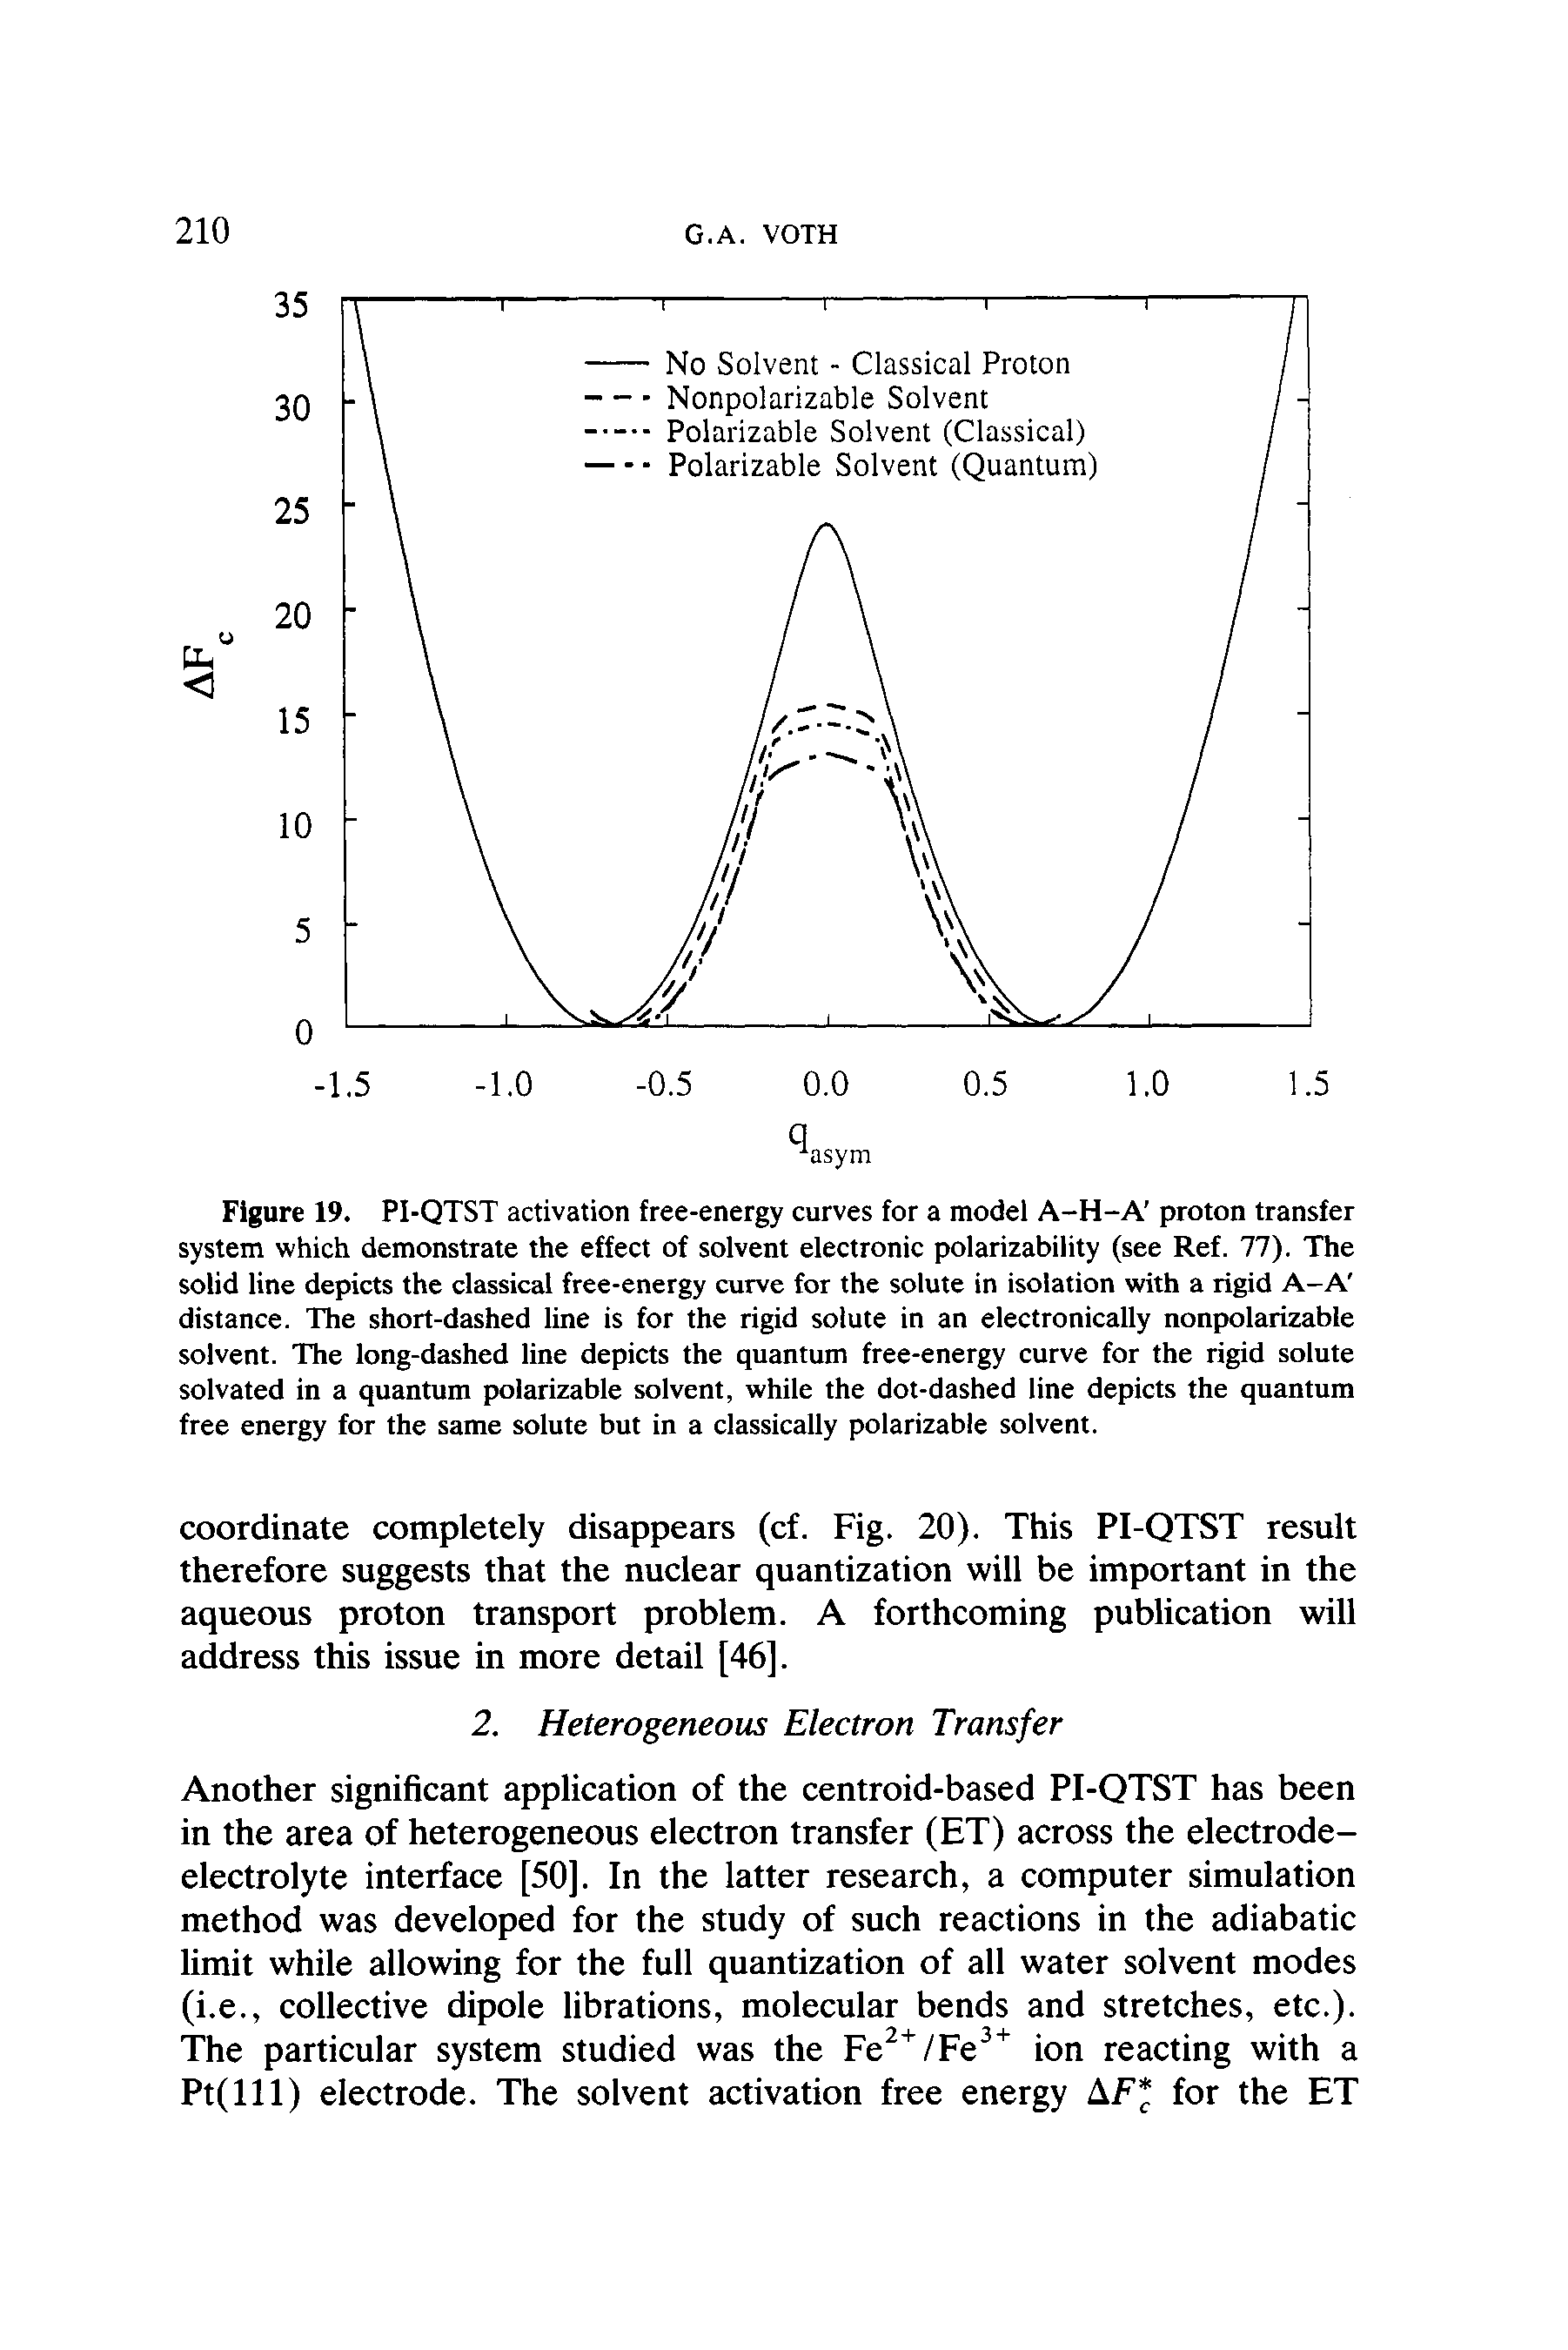 Figure 19. PI-QTST activation free-energy curves for a model A-H-A proton transfer system which demonstrate the effect of solvent electronic polarizability (see Ref. 77). The solid line depicts the classical free-energy curve for the solute in isolation with a rigid A-A distance. The short-dashed line is for the rigid solute in an electronically nonpolarizable solvent. The long-dashed line depicts the quantum free-energy curve for the rigid solute solvated in a quantum polarizable solvent, while the dot-dashed line depicts the quantum free energy for the same solute but in a classically polarizable solvent.